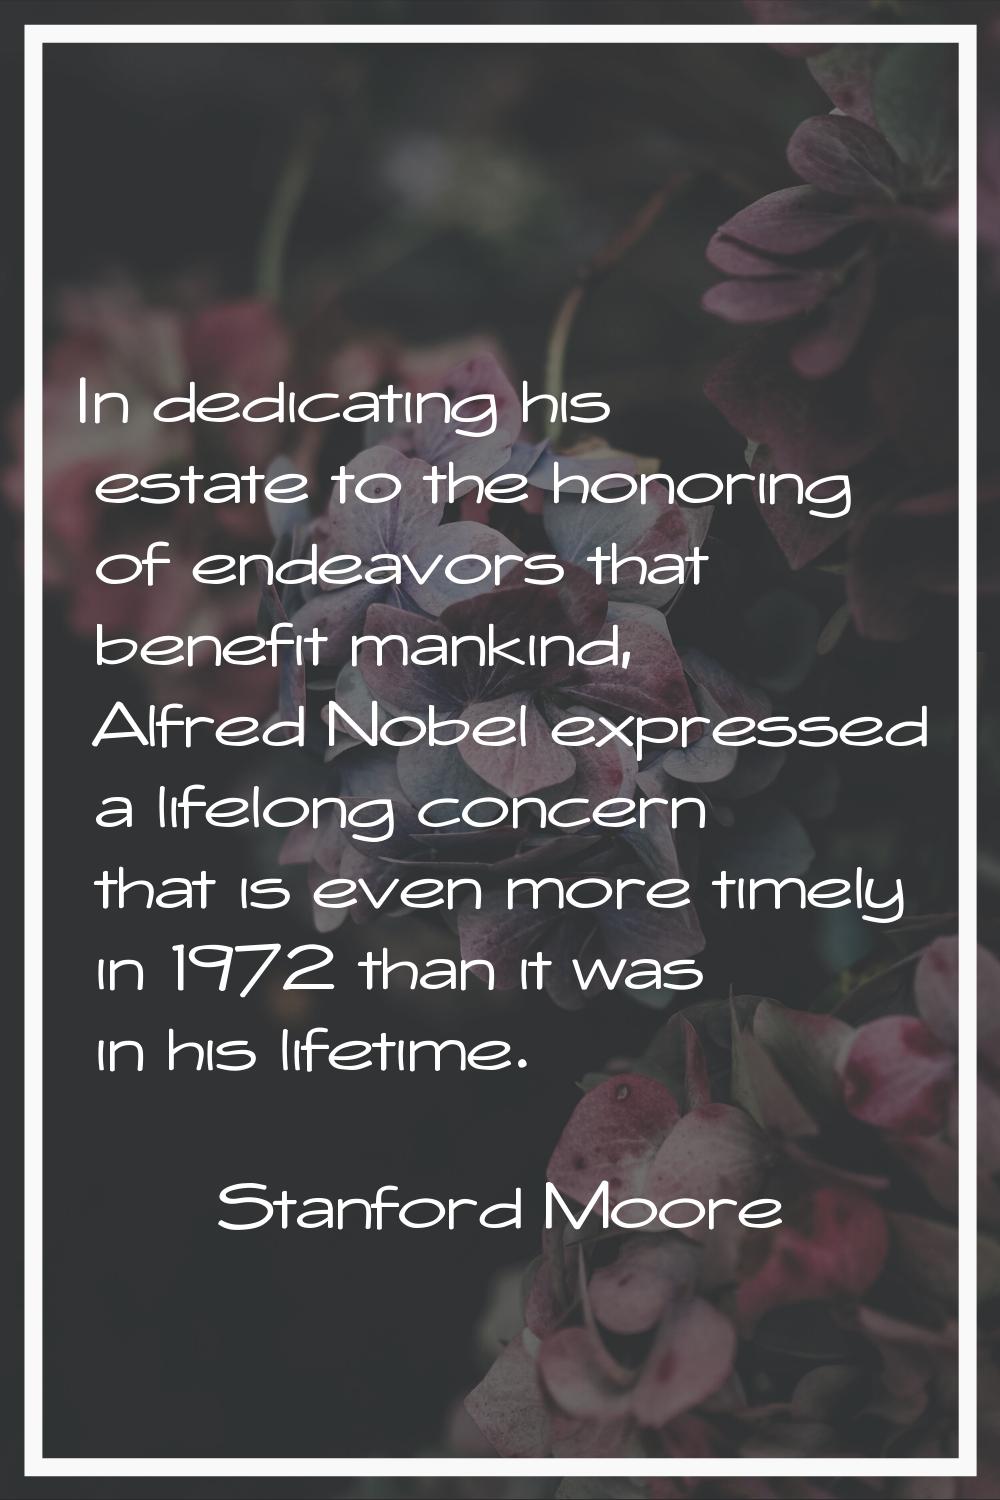 In dedicating his estate to the honoring of endeavors that benefit mankind, Alfred Nobel expressed 